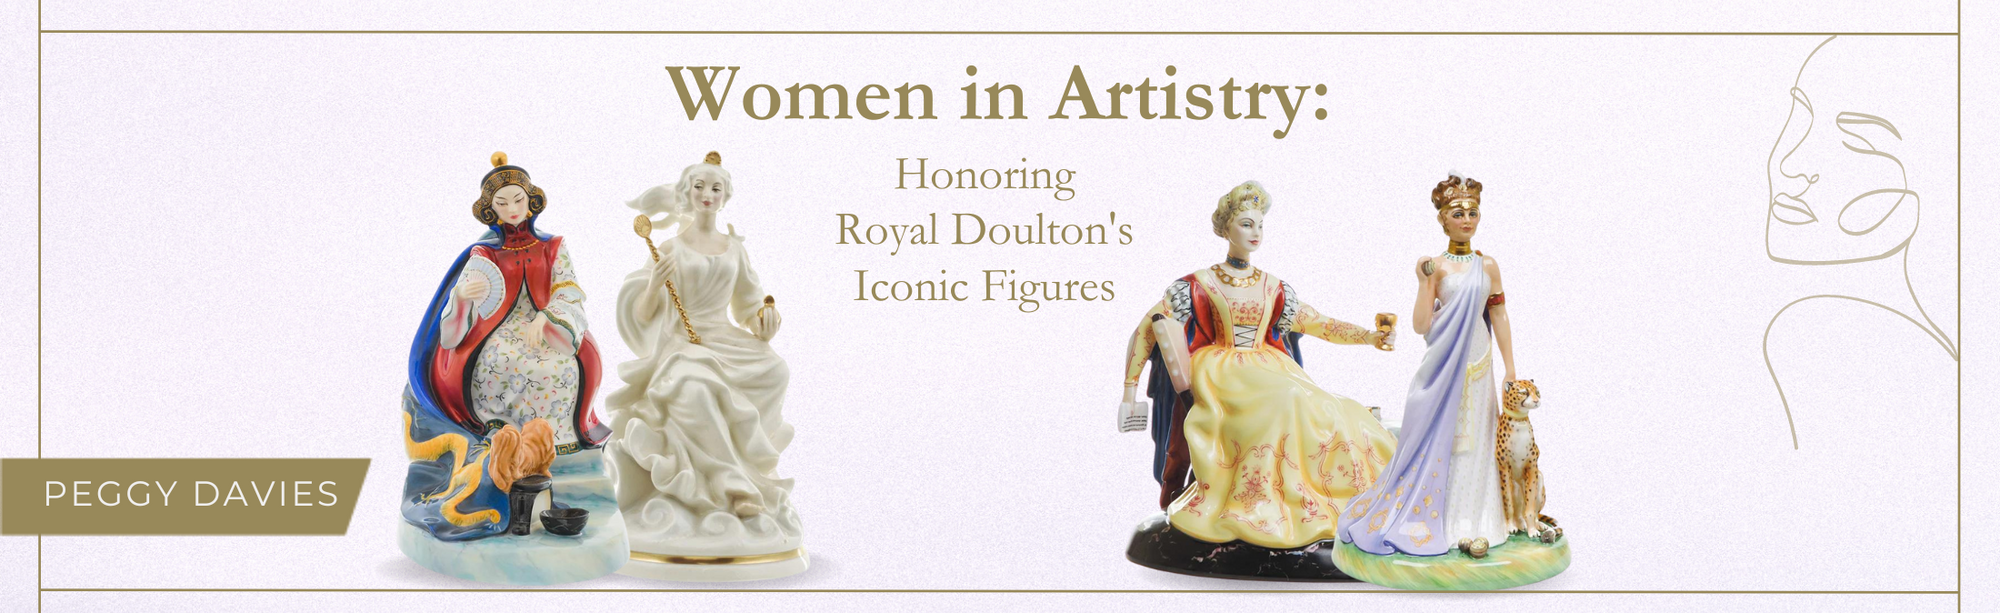 Honoring Women of Distinction in Royal Doulton's Legacy: A Tribute to Margaret (Peggy) Davies